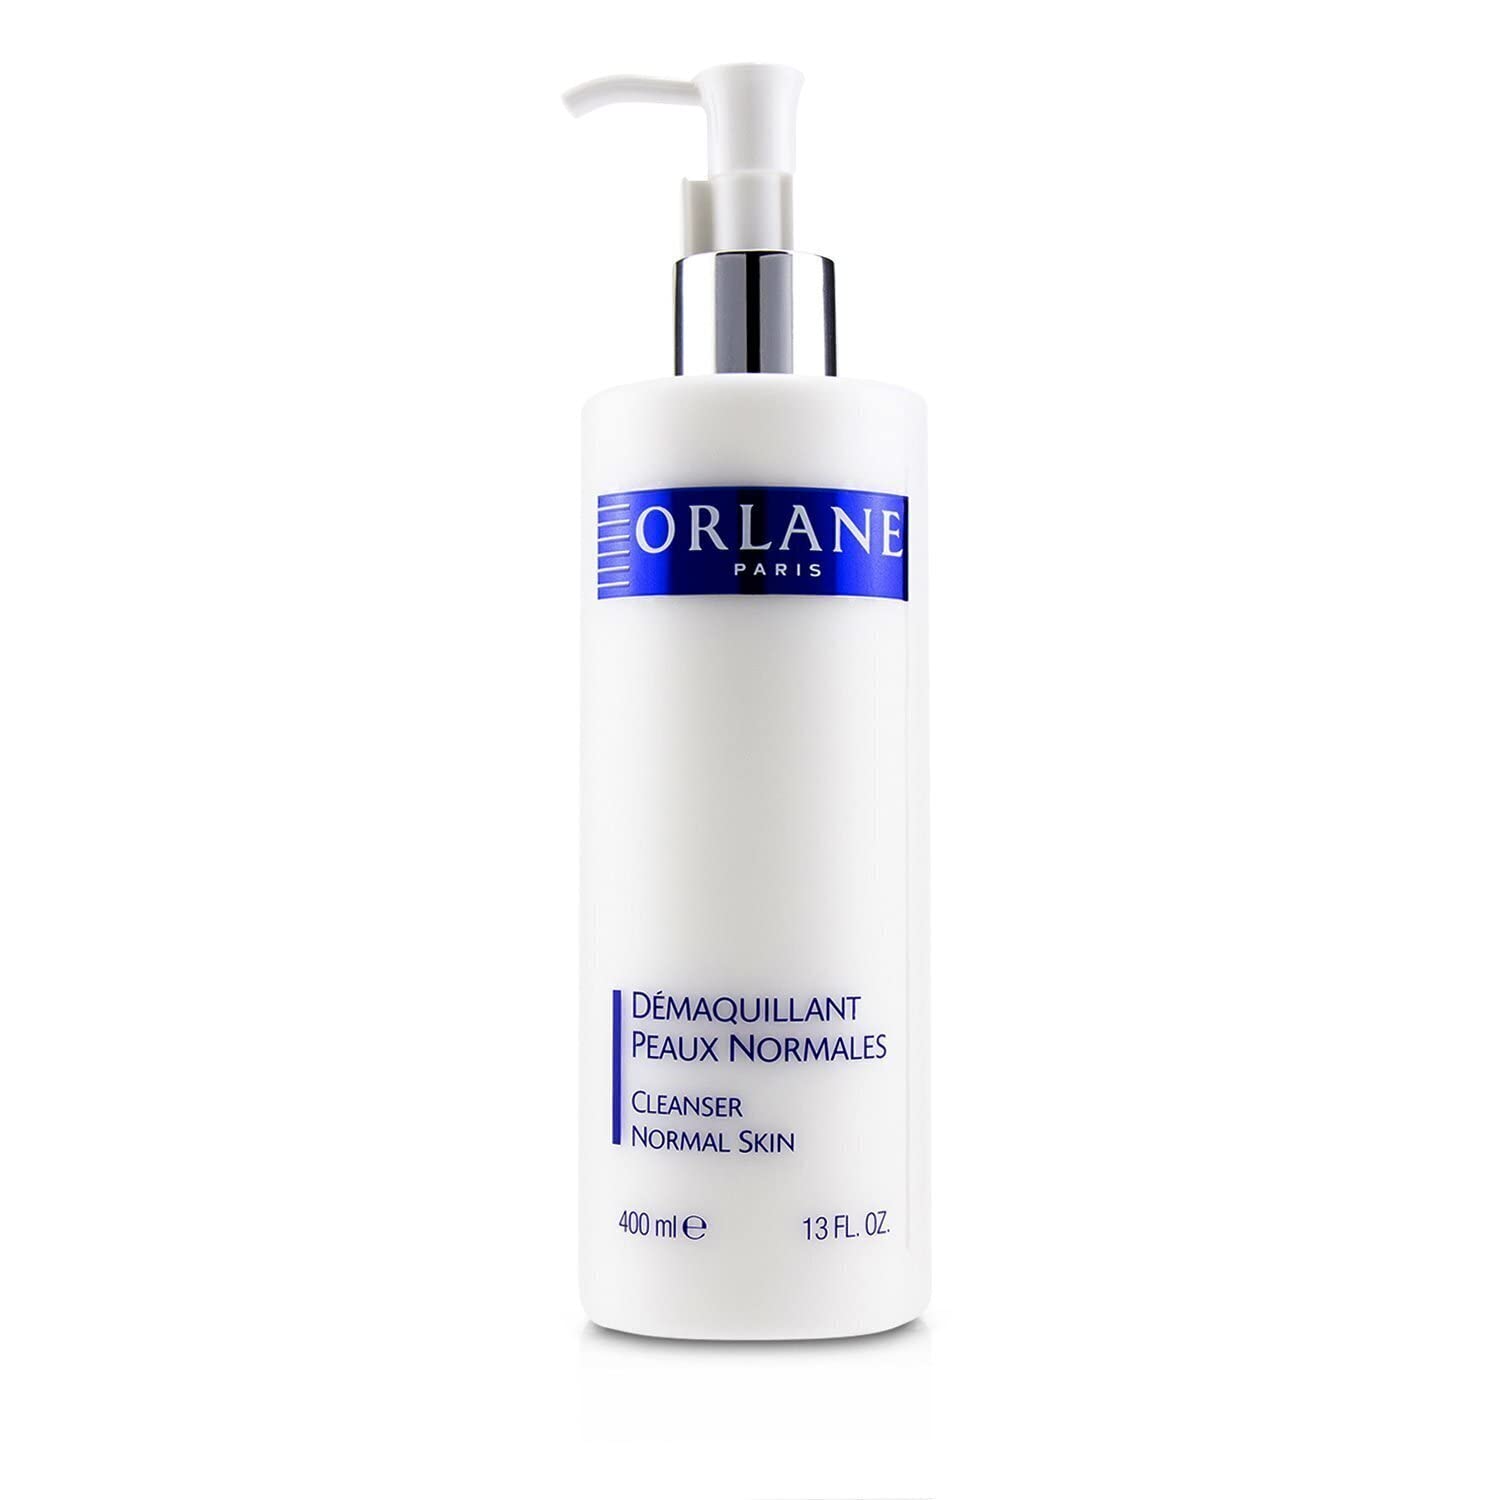 Orlane Demaquillant Peaux Normales Cleaner Normal Skin 400ml